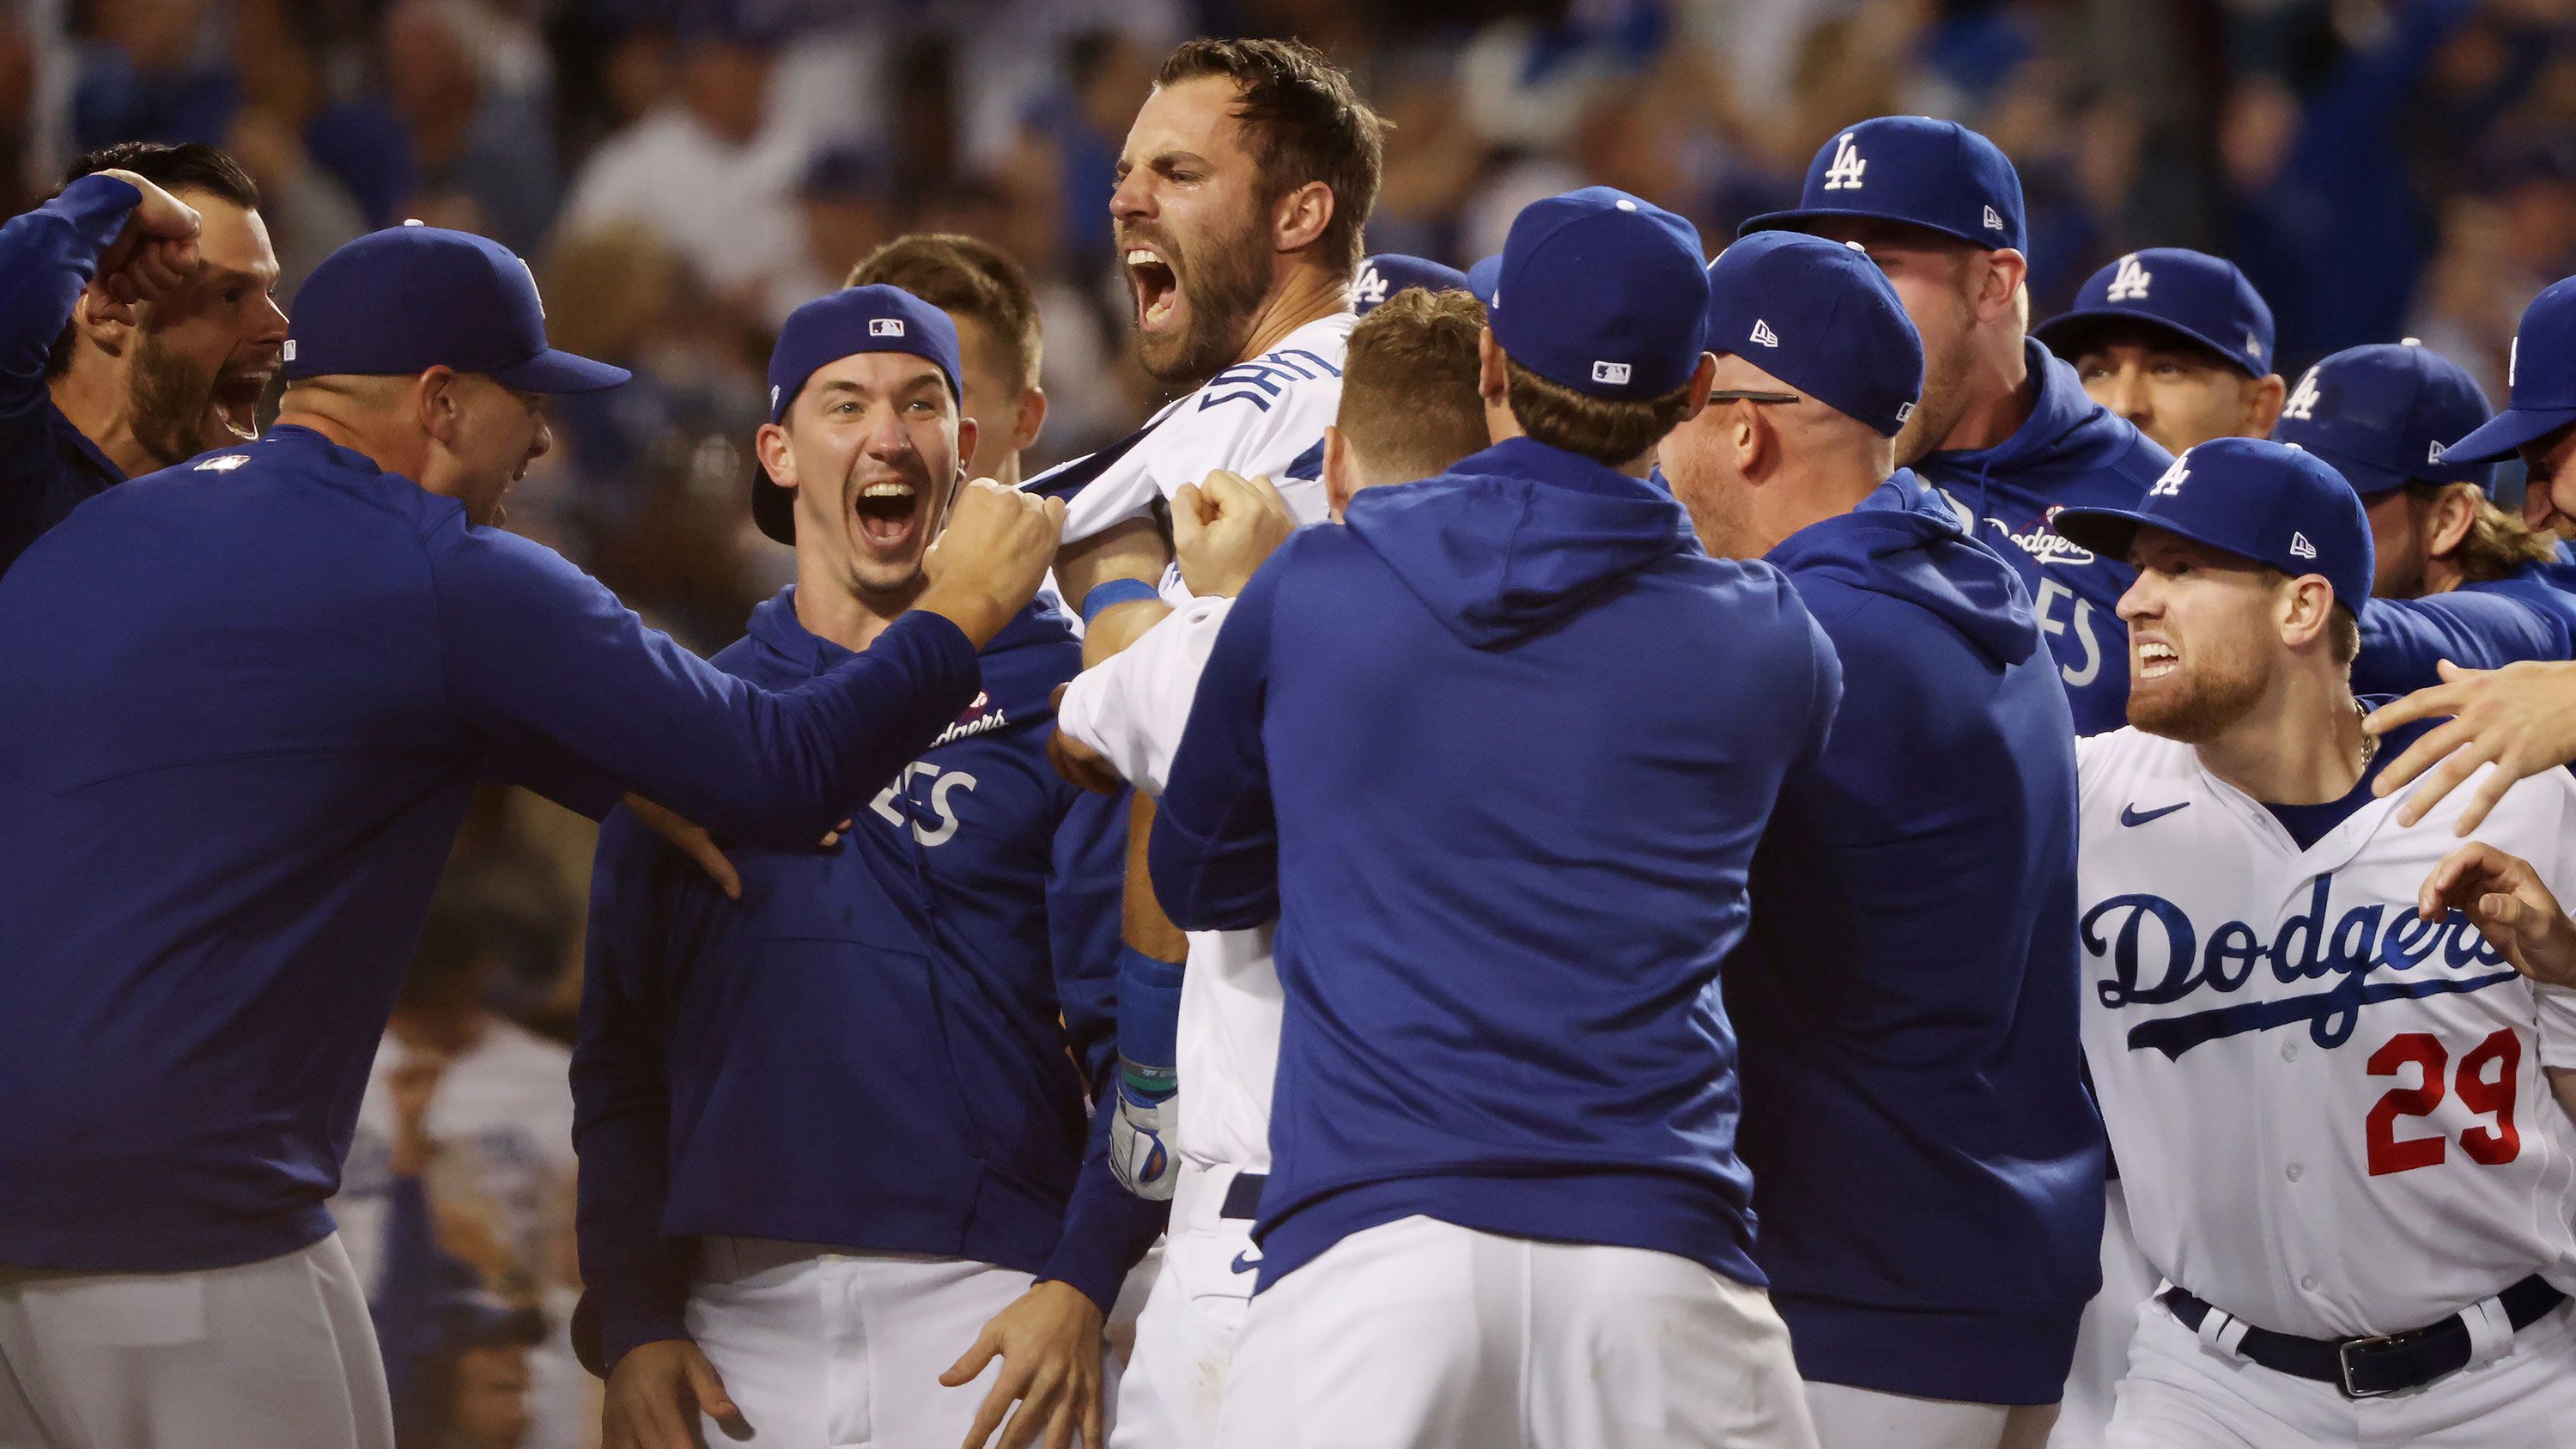 MLB playoffs: Dynasties and bragging rights are at stake